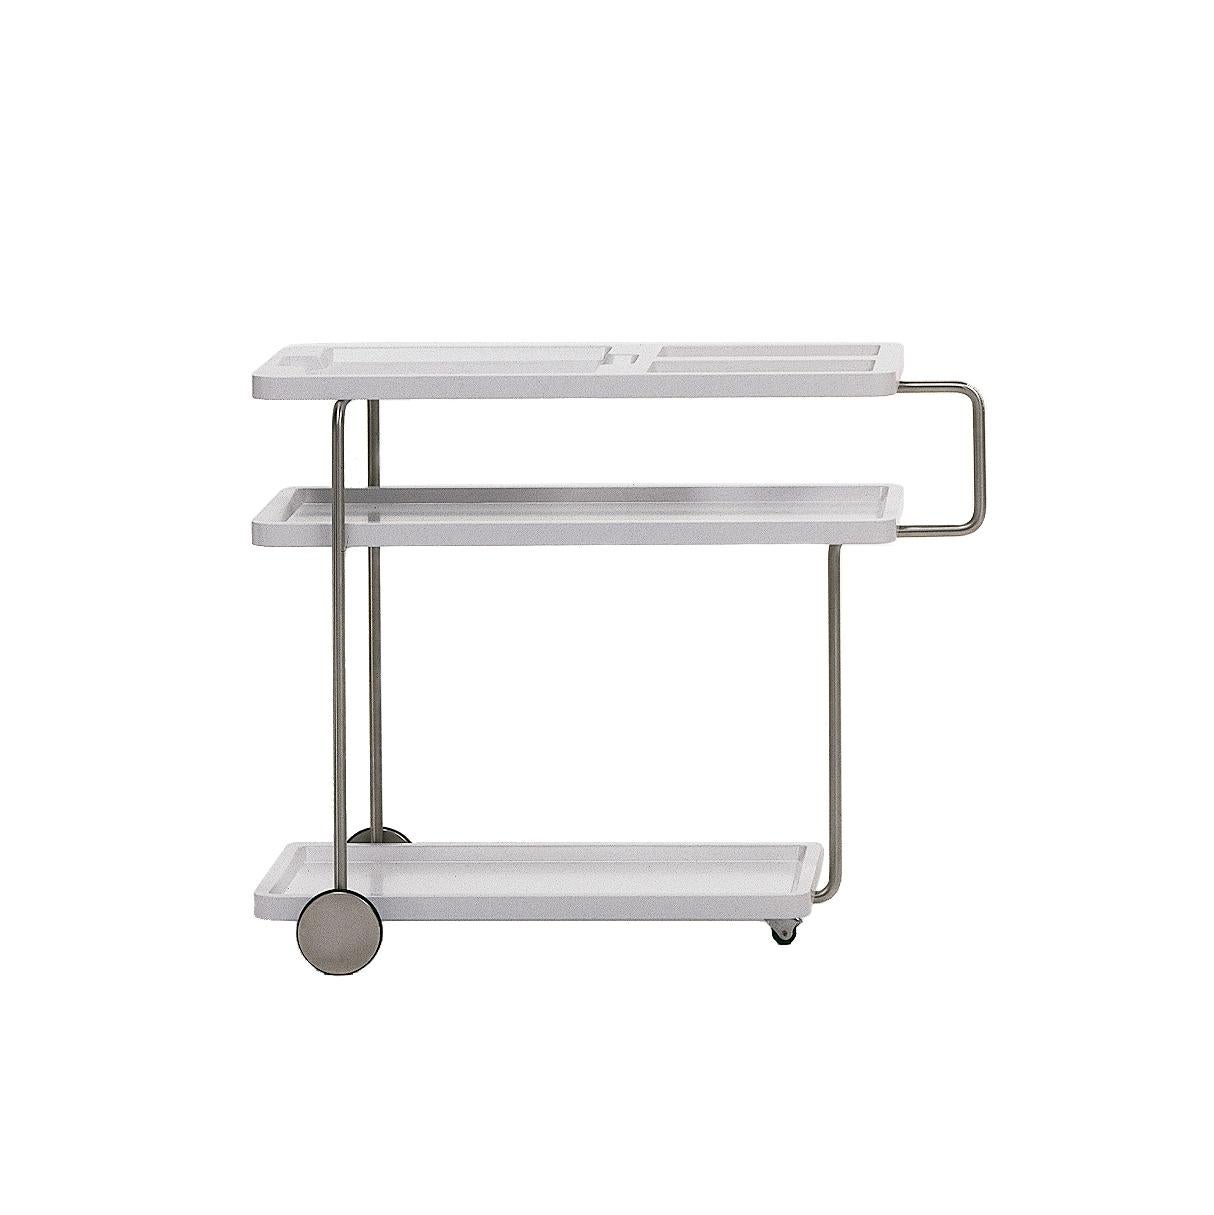 Happy hour trolley by Alfredo Häberli

Black or withe trolley. Chromed iron structure. Heat-shaped ABS+PMMA plastic trays, available painted with polyurethane micro-textured in matt white RAL 9003 or black RAL 9005.

Optional: Service table /